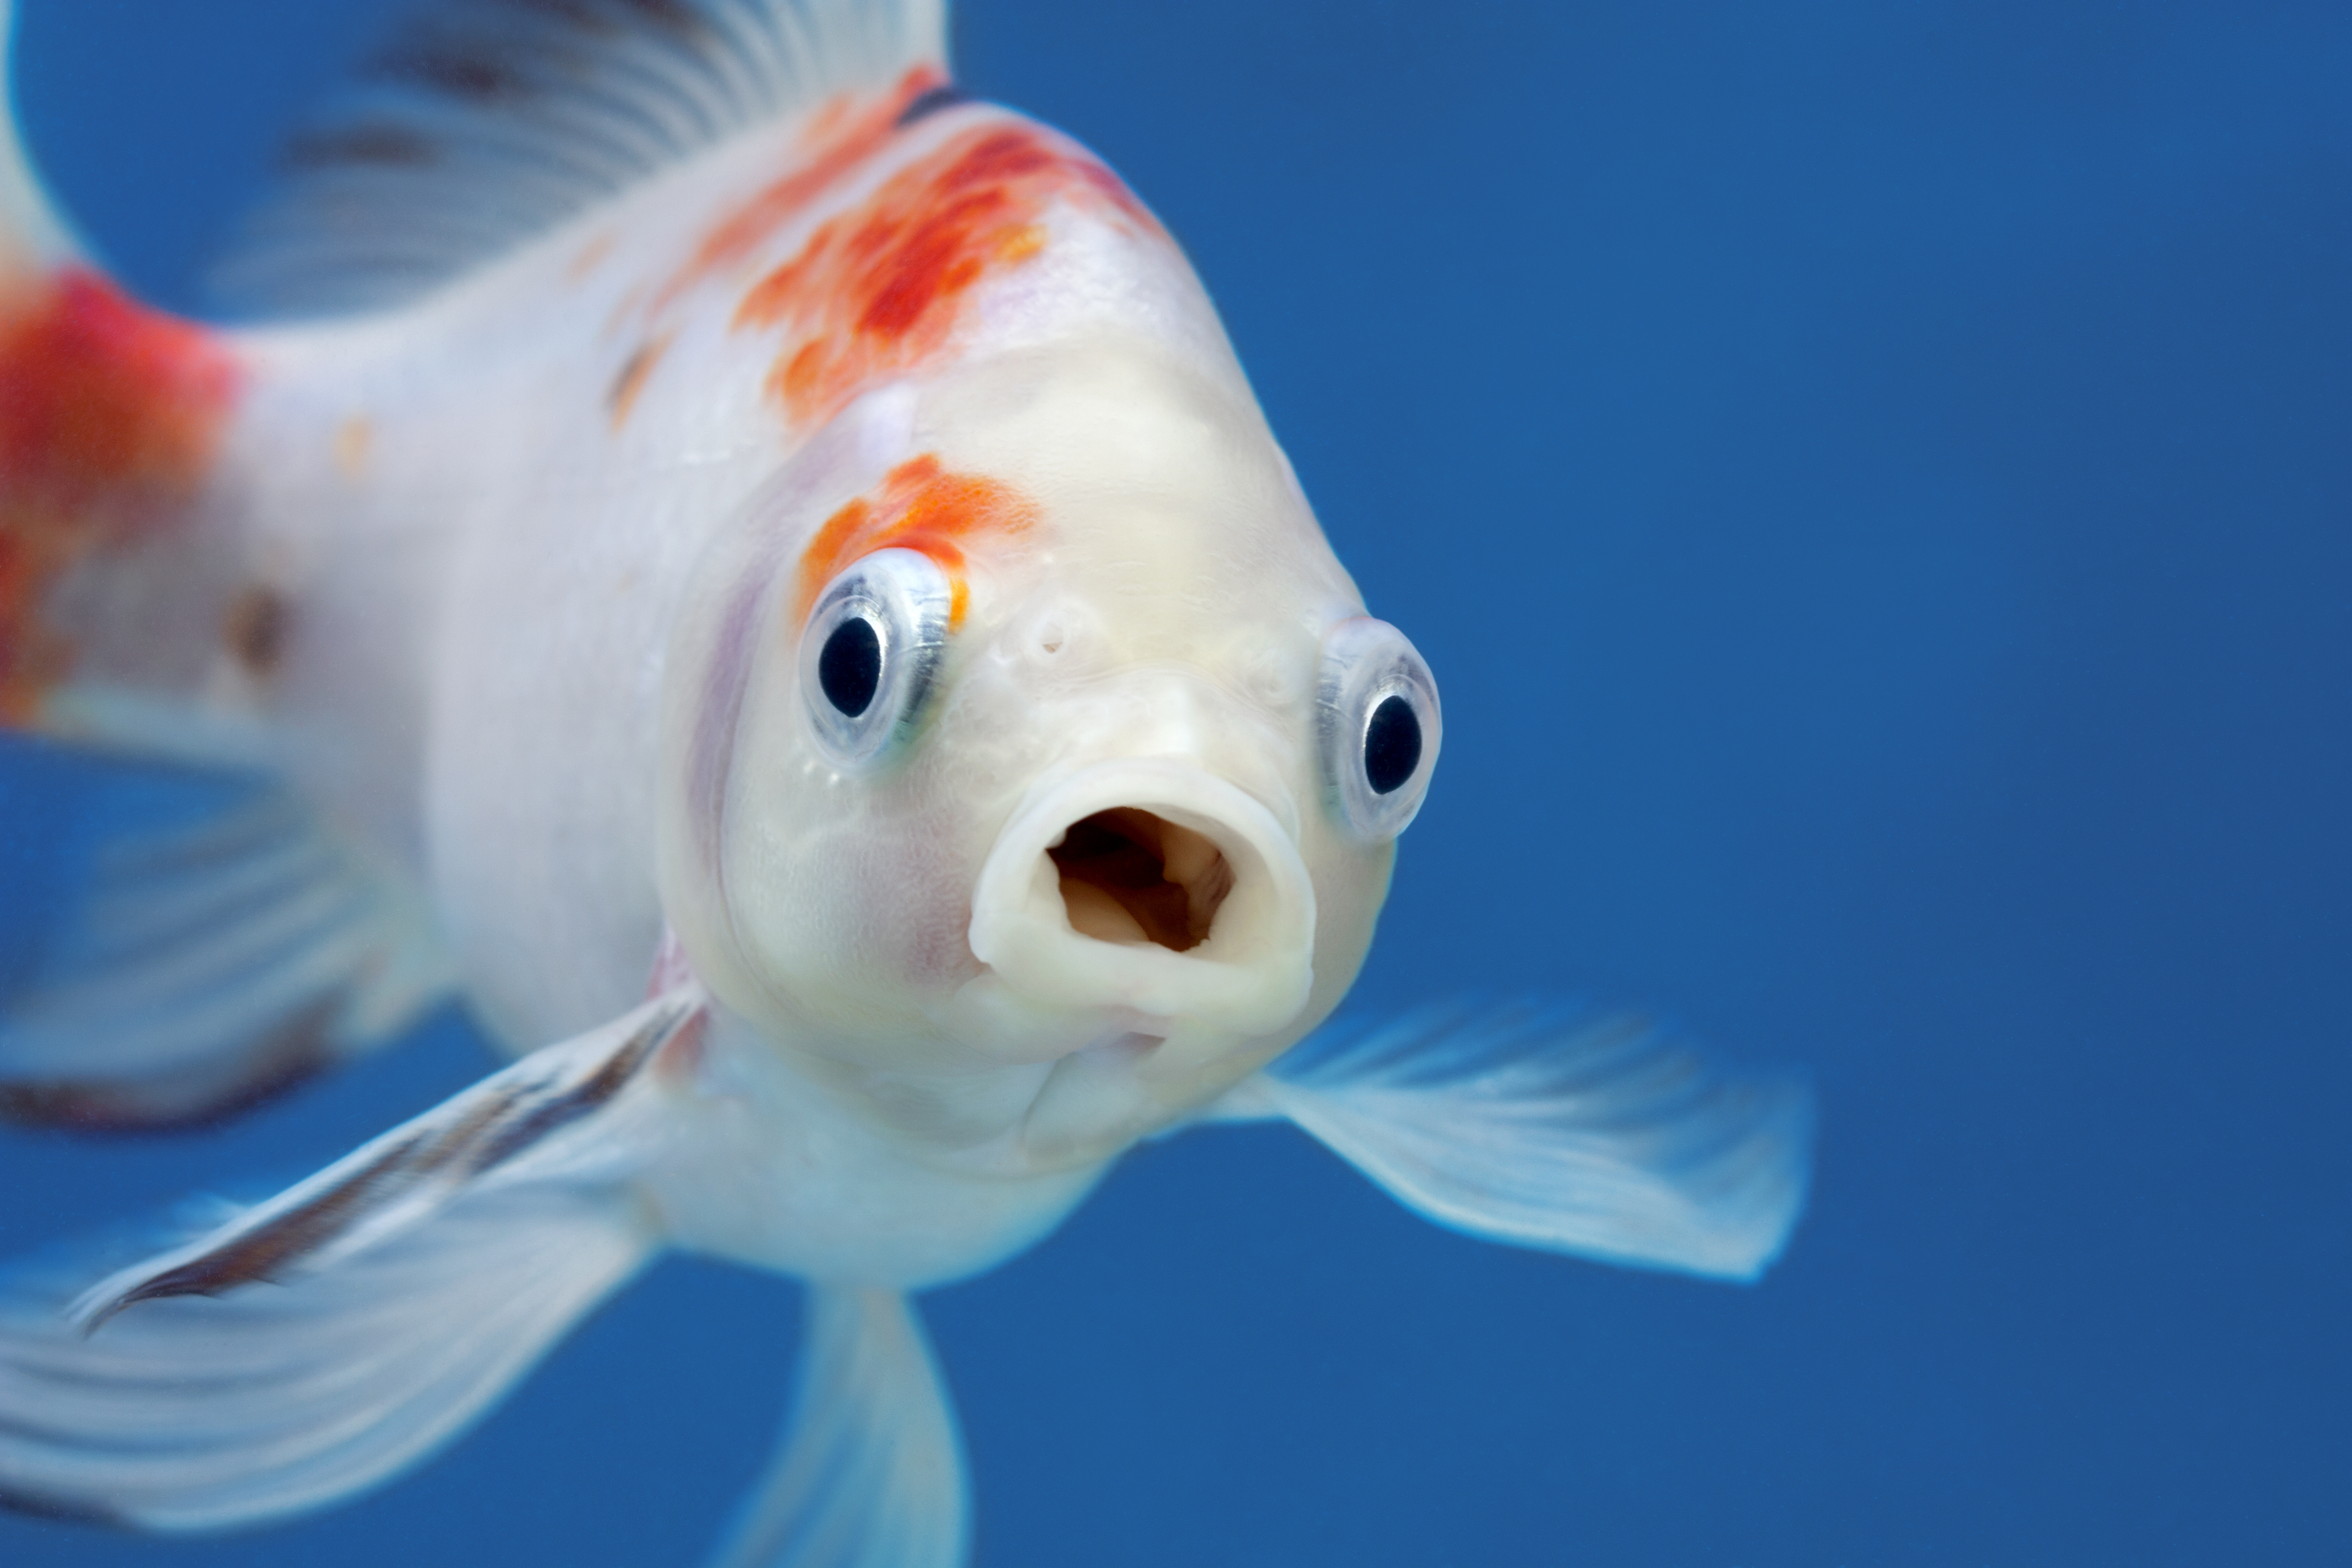 A surprised looking fish